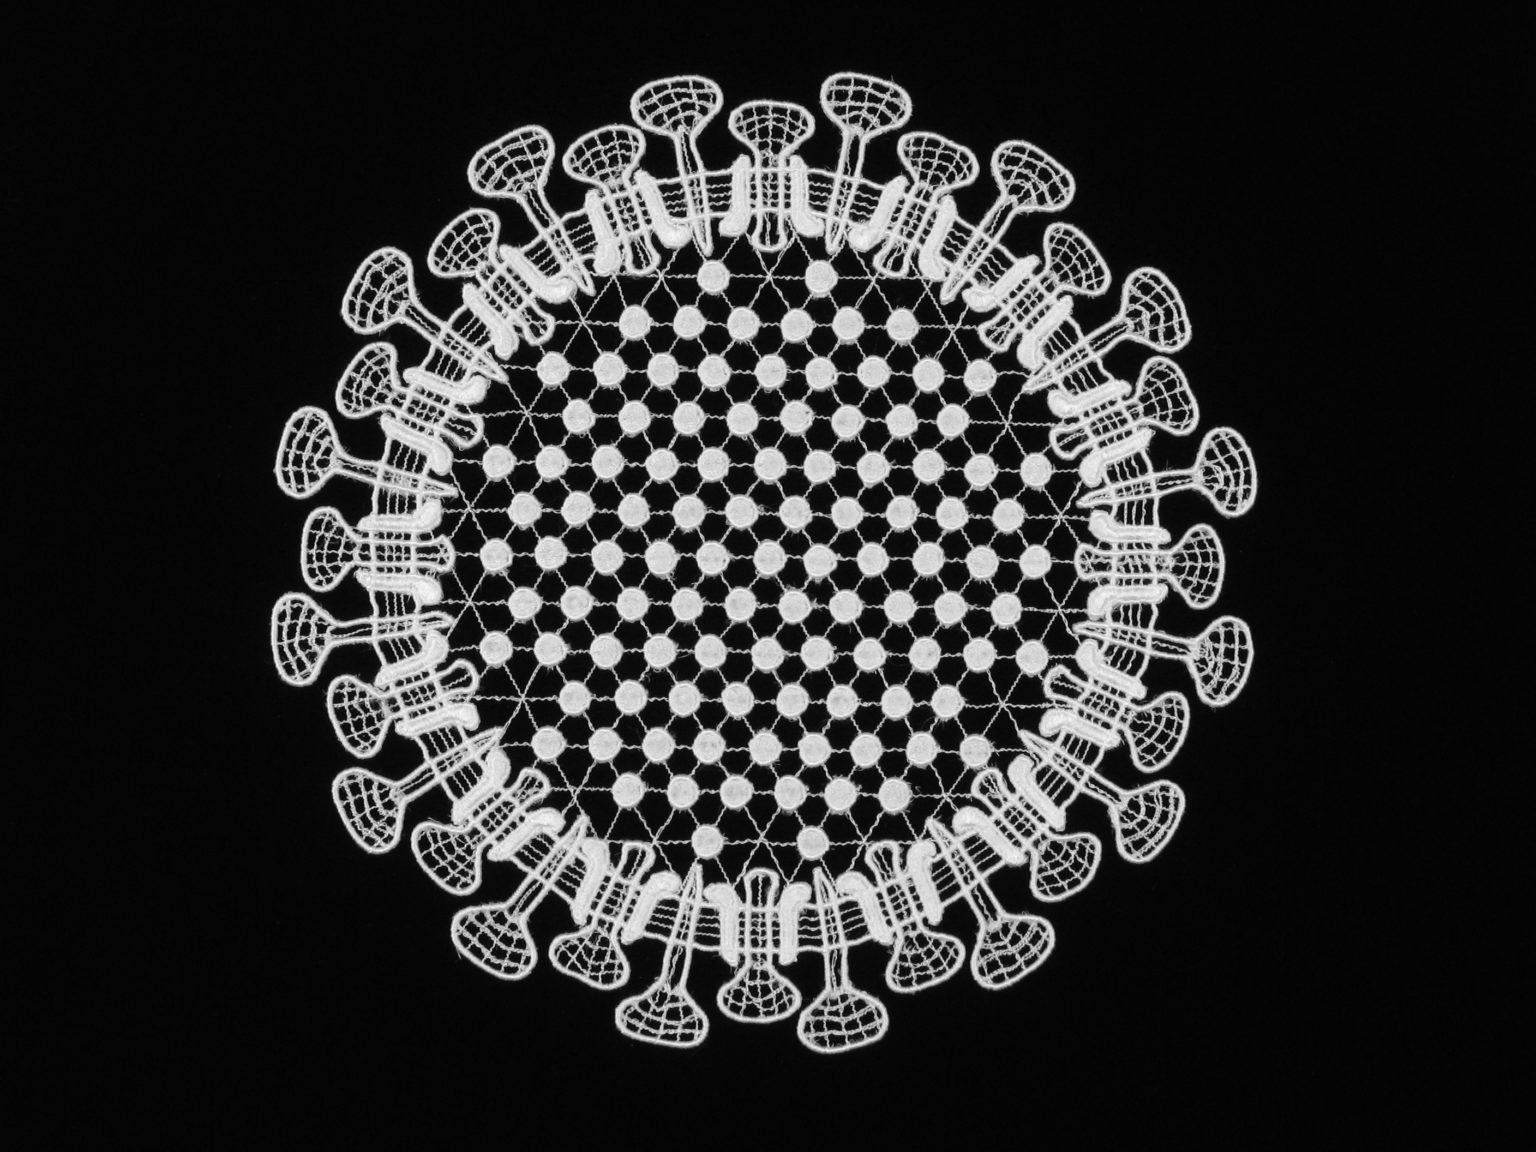 black image of a black background with white crocheted circle design